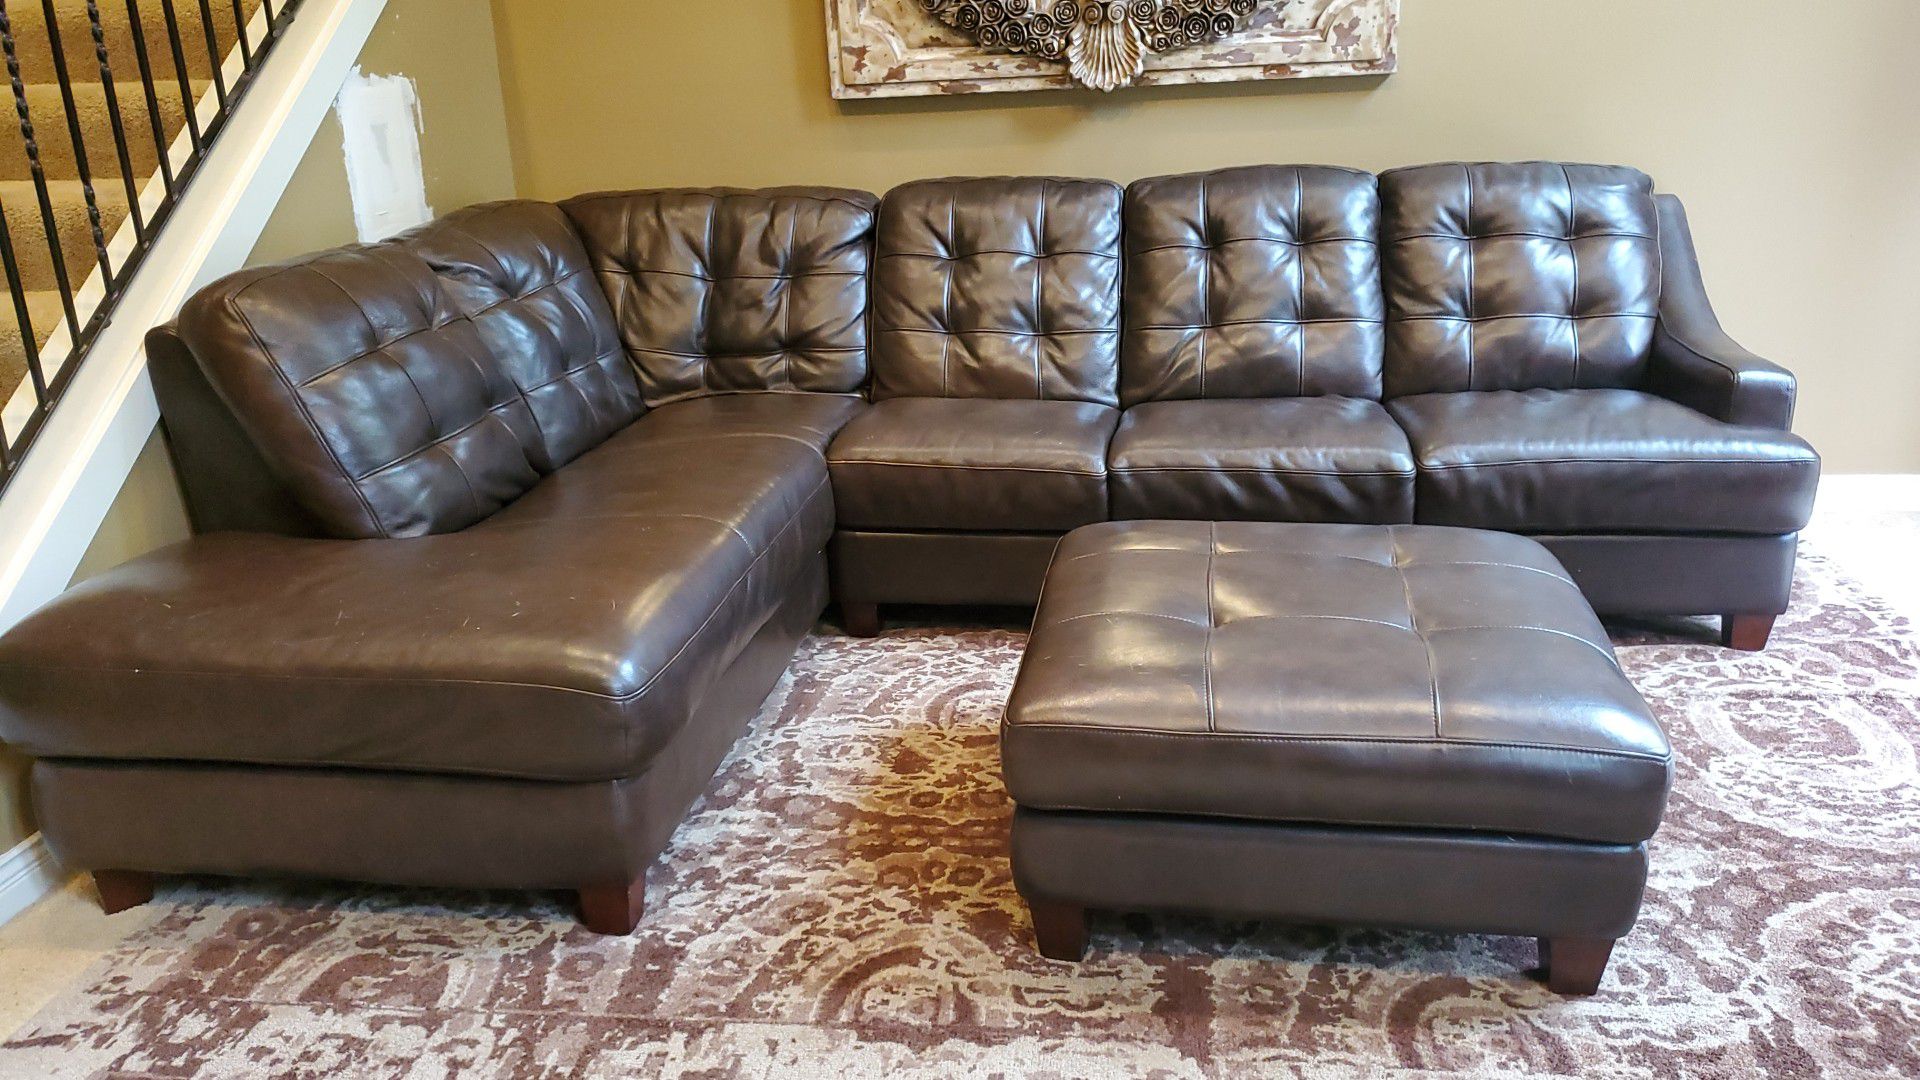 Mercer brown leather sectional couch with storage ottoman